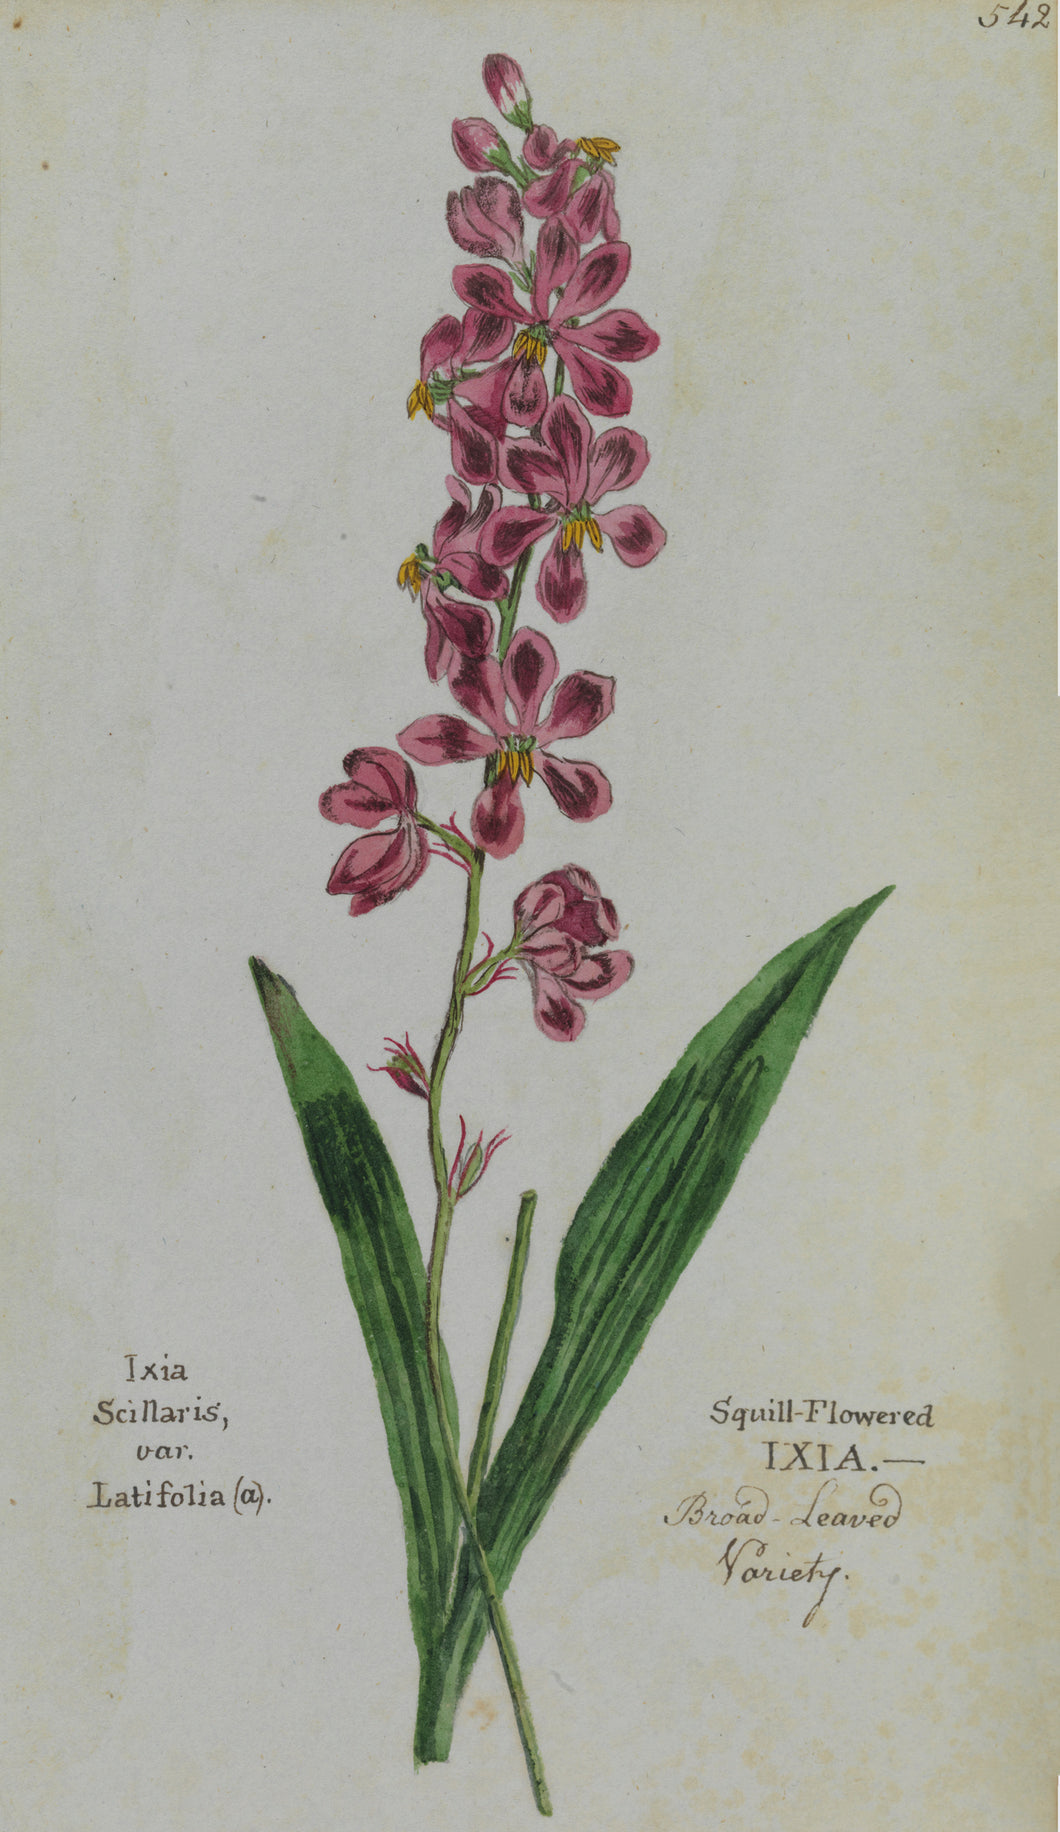 Squill-flowered Ixia